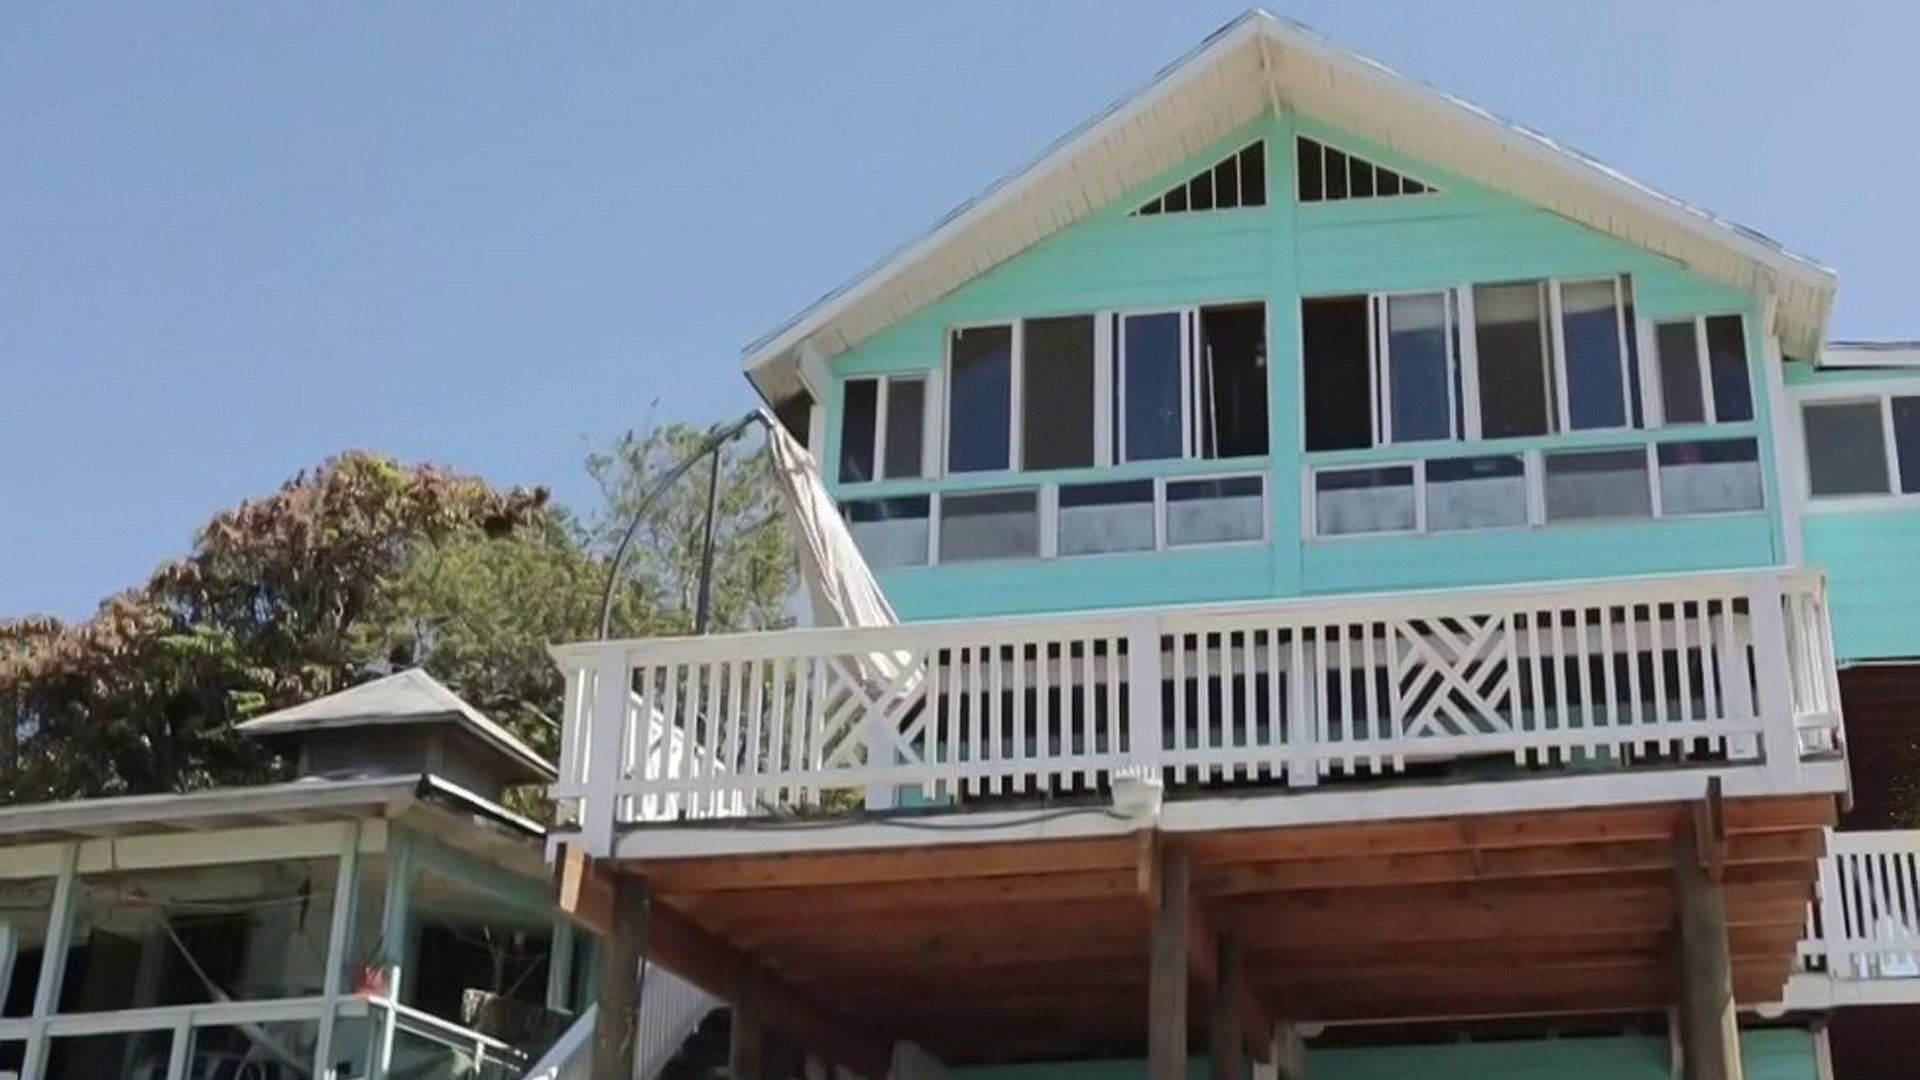 A Ferry Ride to a Fairyland House on St. Thomas